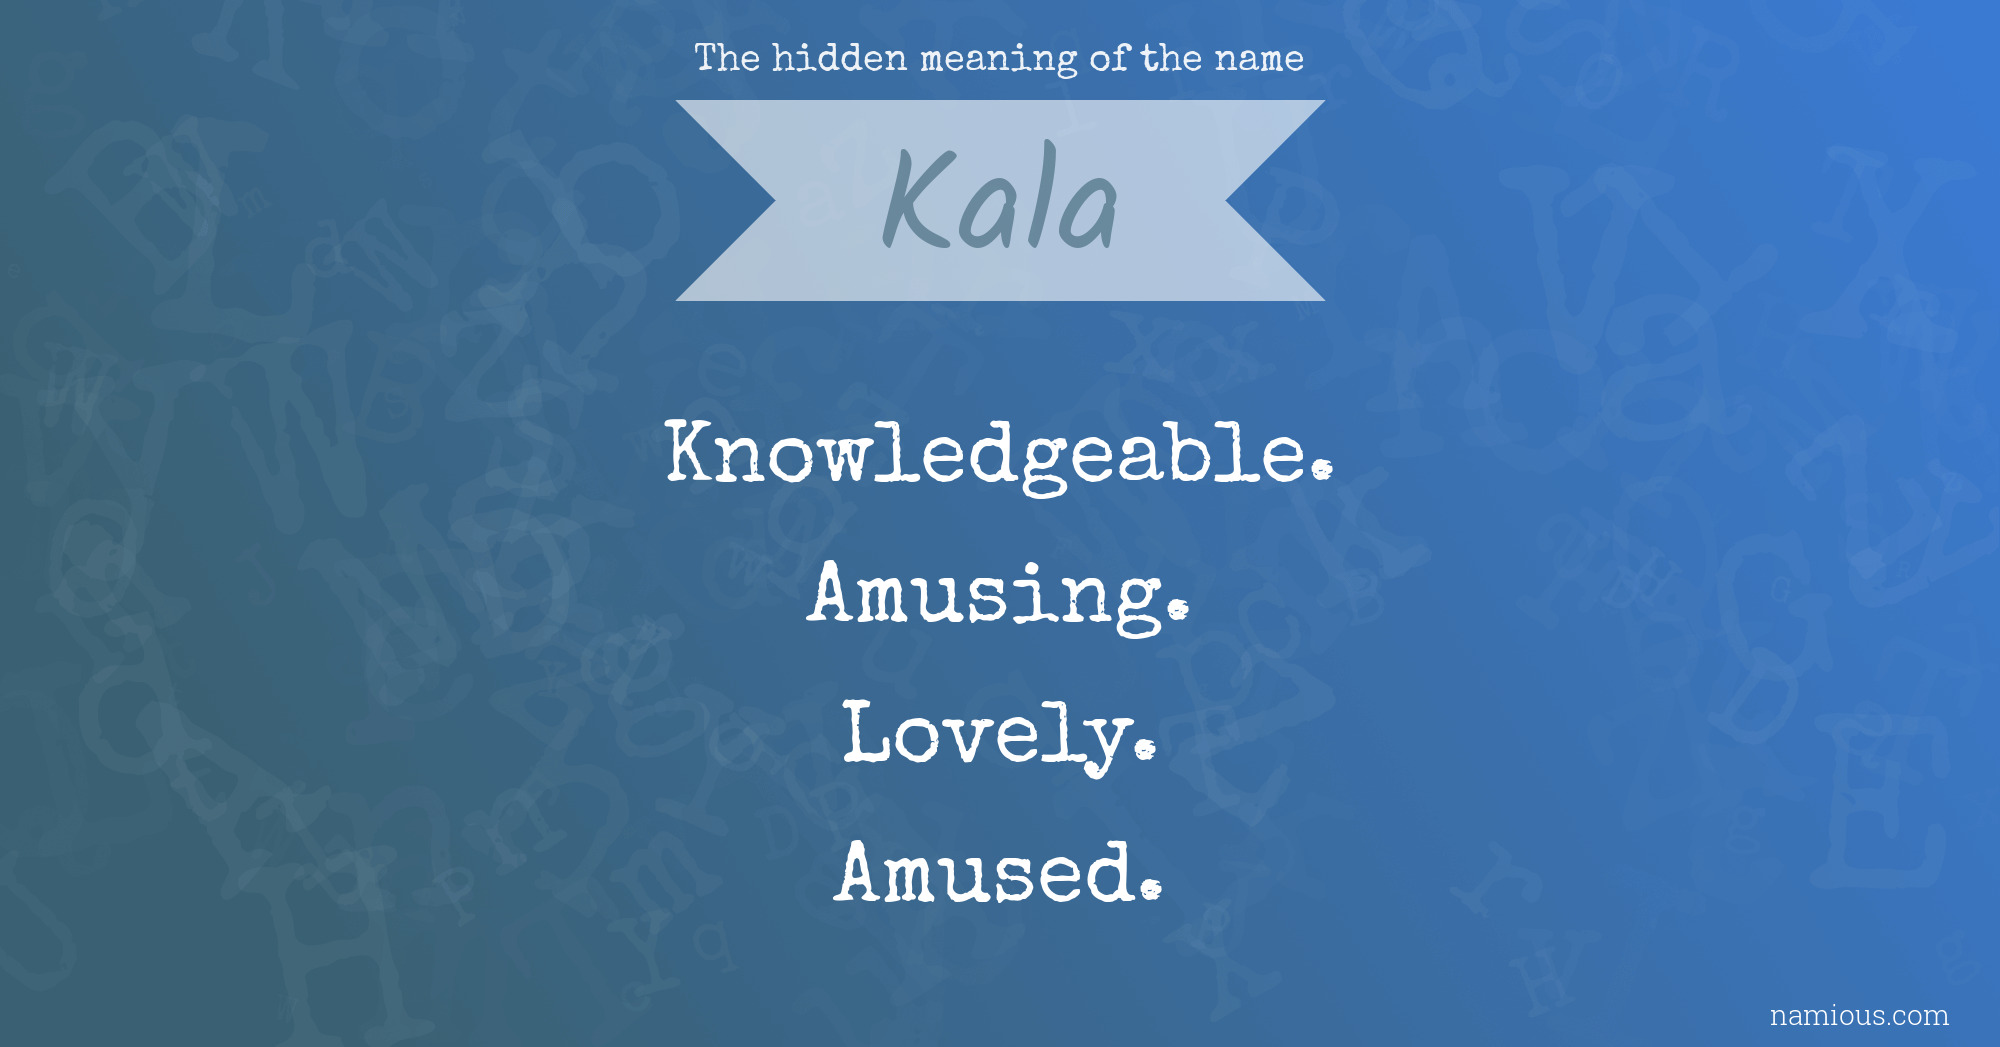 The hidden meaning of the name Kala